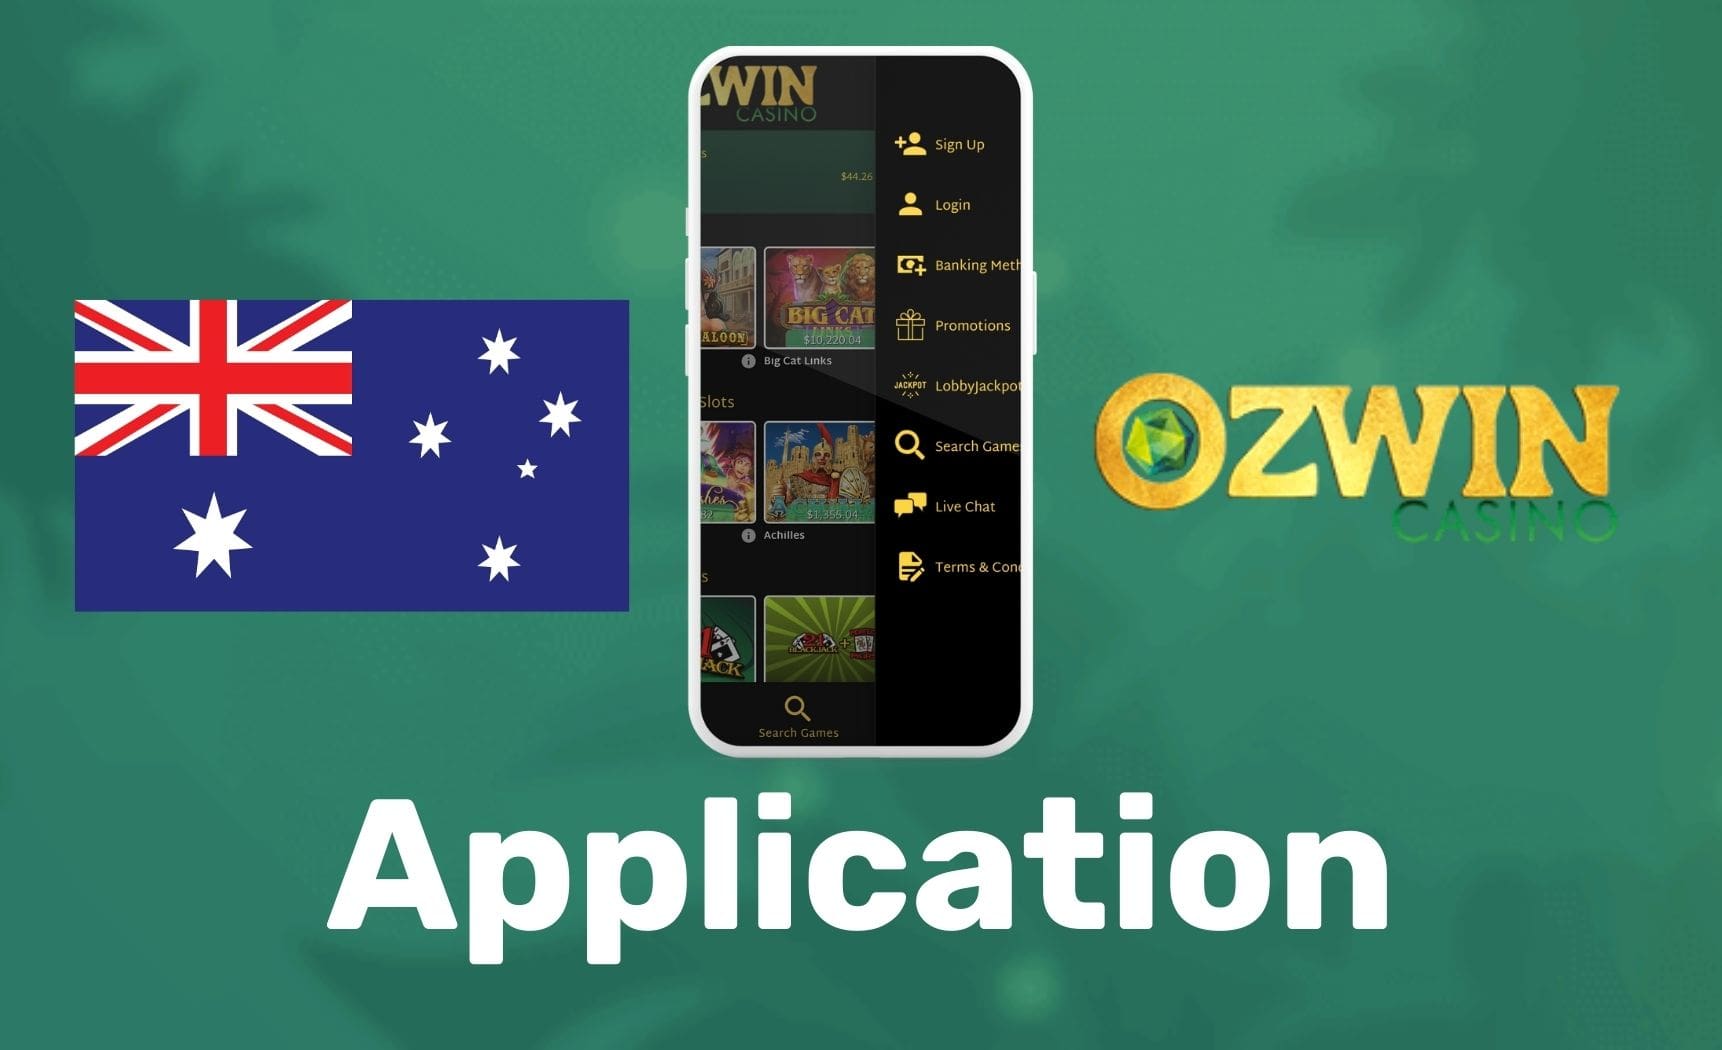 Ozwin Casino Application download and instsll